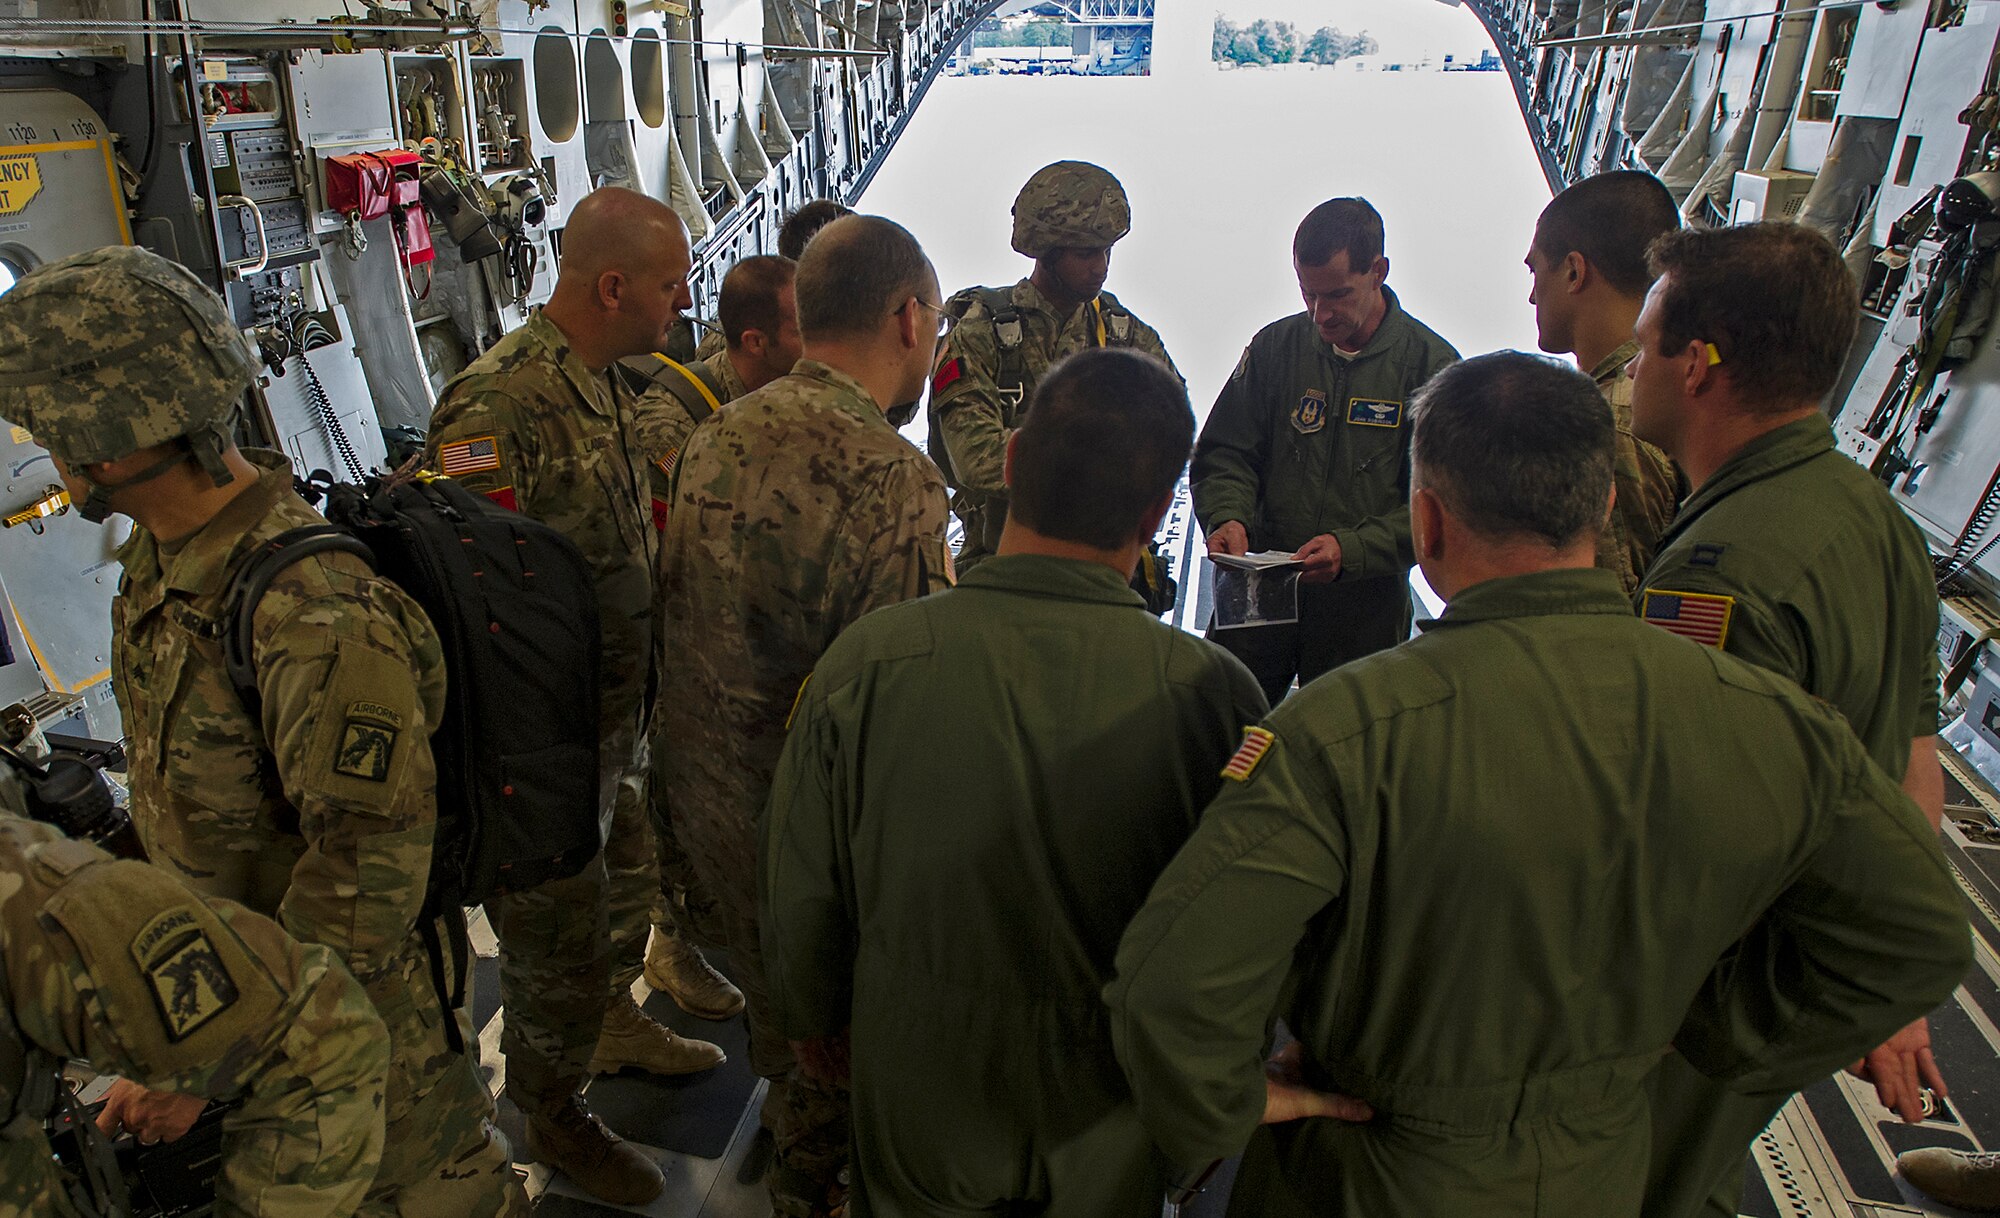 315th Operations Group Commander, Lt. Col. John Robinson give Army jumpmasters a pre-jump briefing before they take off for their drop zone at Fort Bragg, N.C. About 1,600 paratroopers from the 82nd Airborne Division packed 18 C-17 Globemaster IIIs from Joint Base Charleston, S.C. en-route to a a Fort Bragg, N.C. airdrop May 25. (U.S. Air Force Photo / Master Sgt, Shane Ellis)